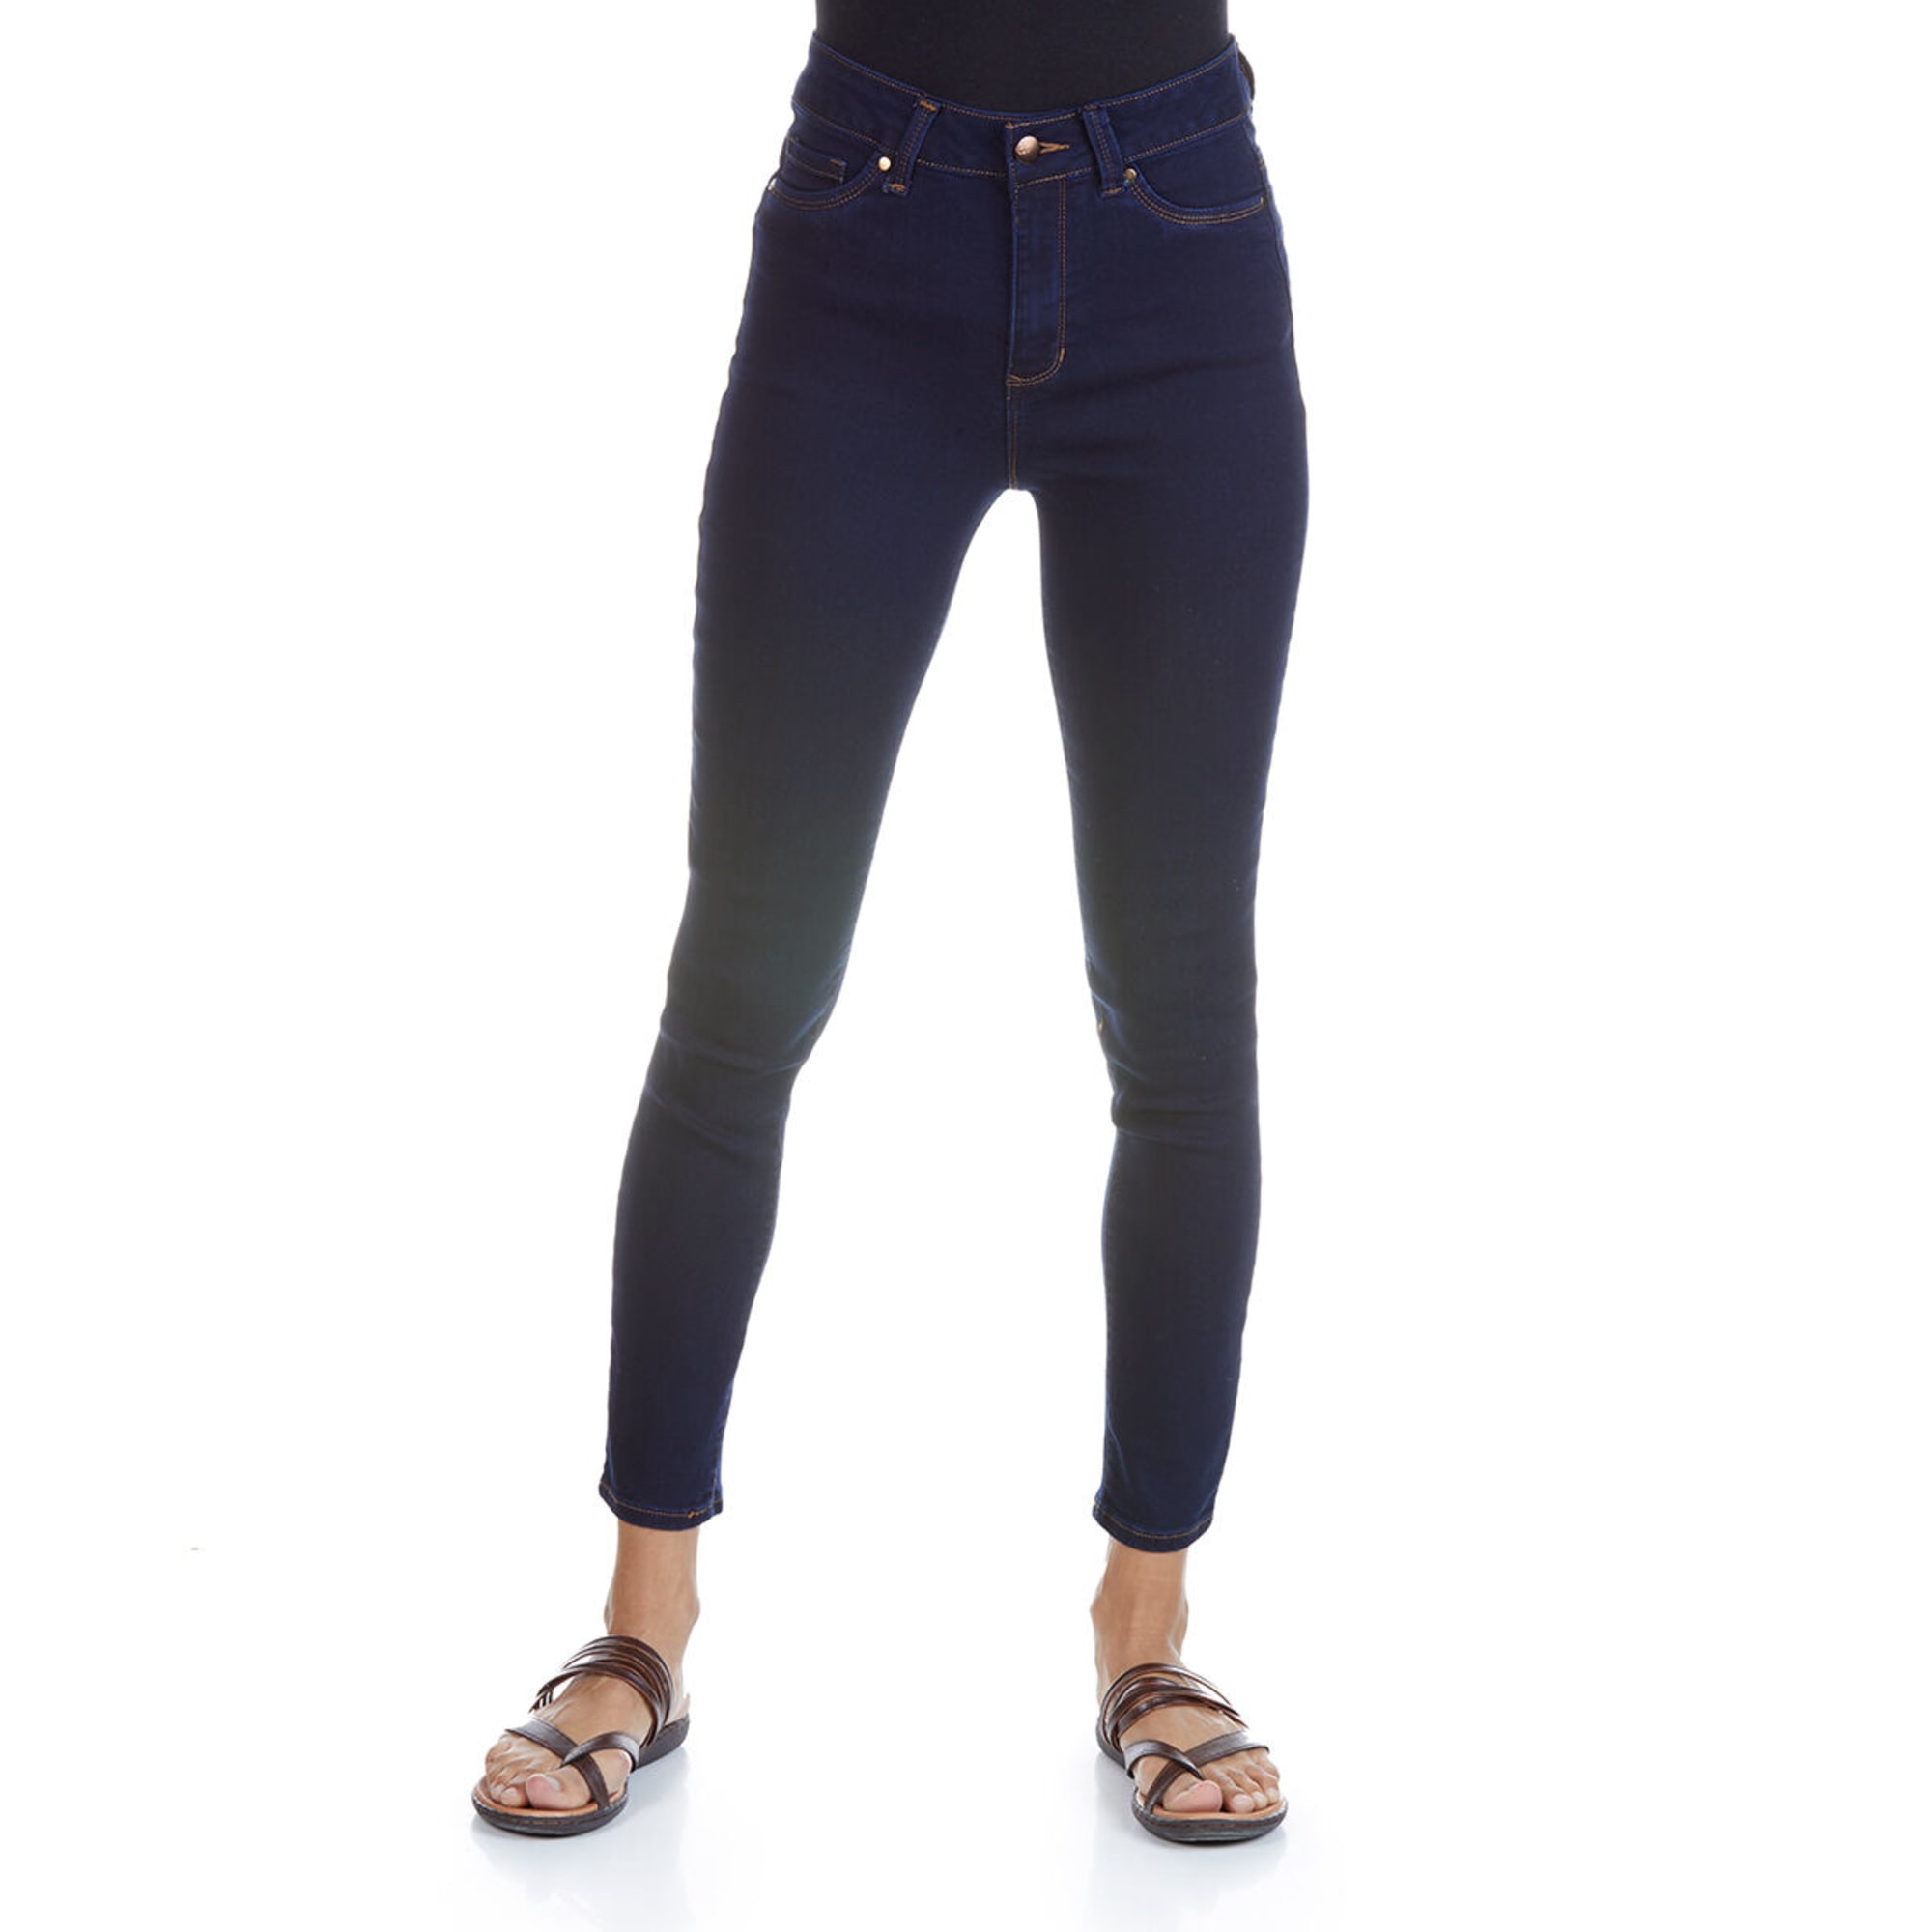 levi's women's relaxed fit jeans